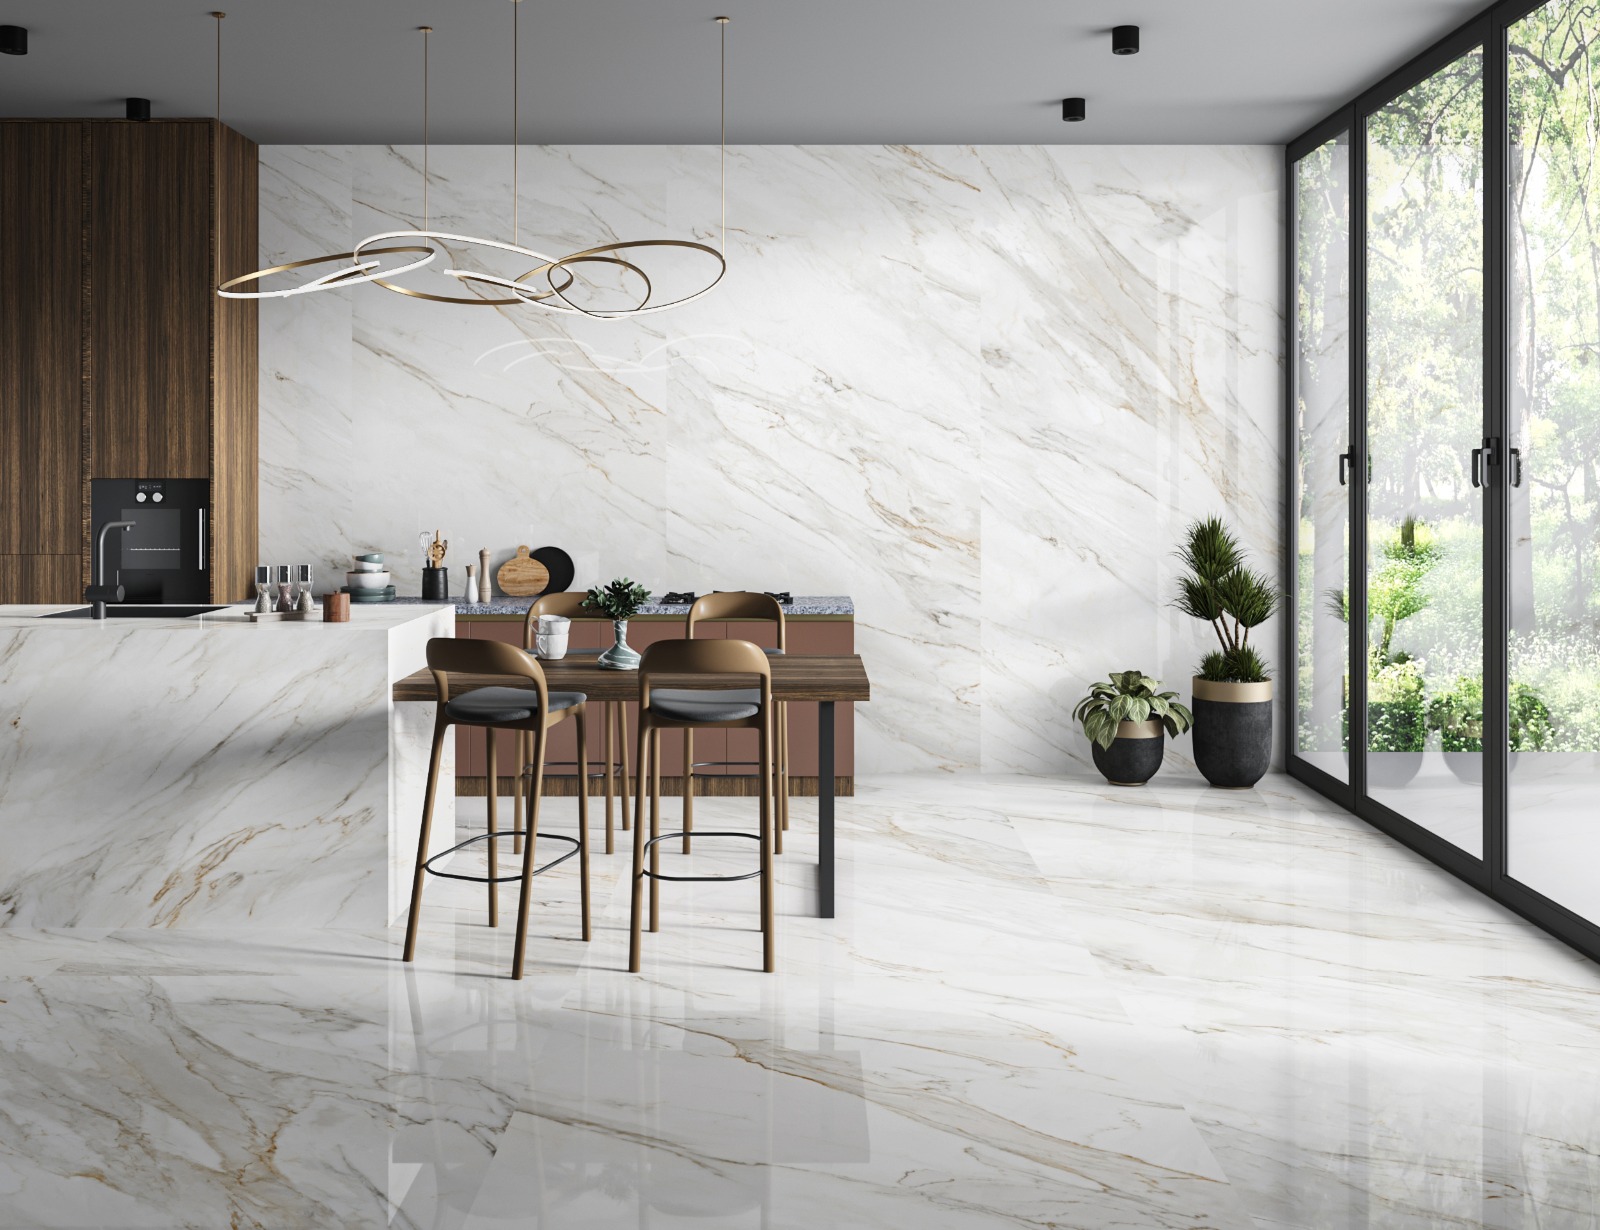 Glossy Vs Matte Finish Porcelain Tiles: What Is The Difference?